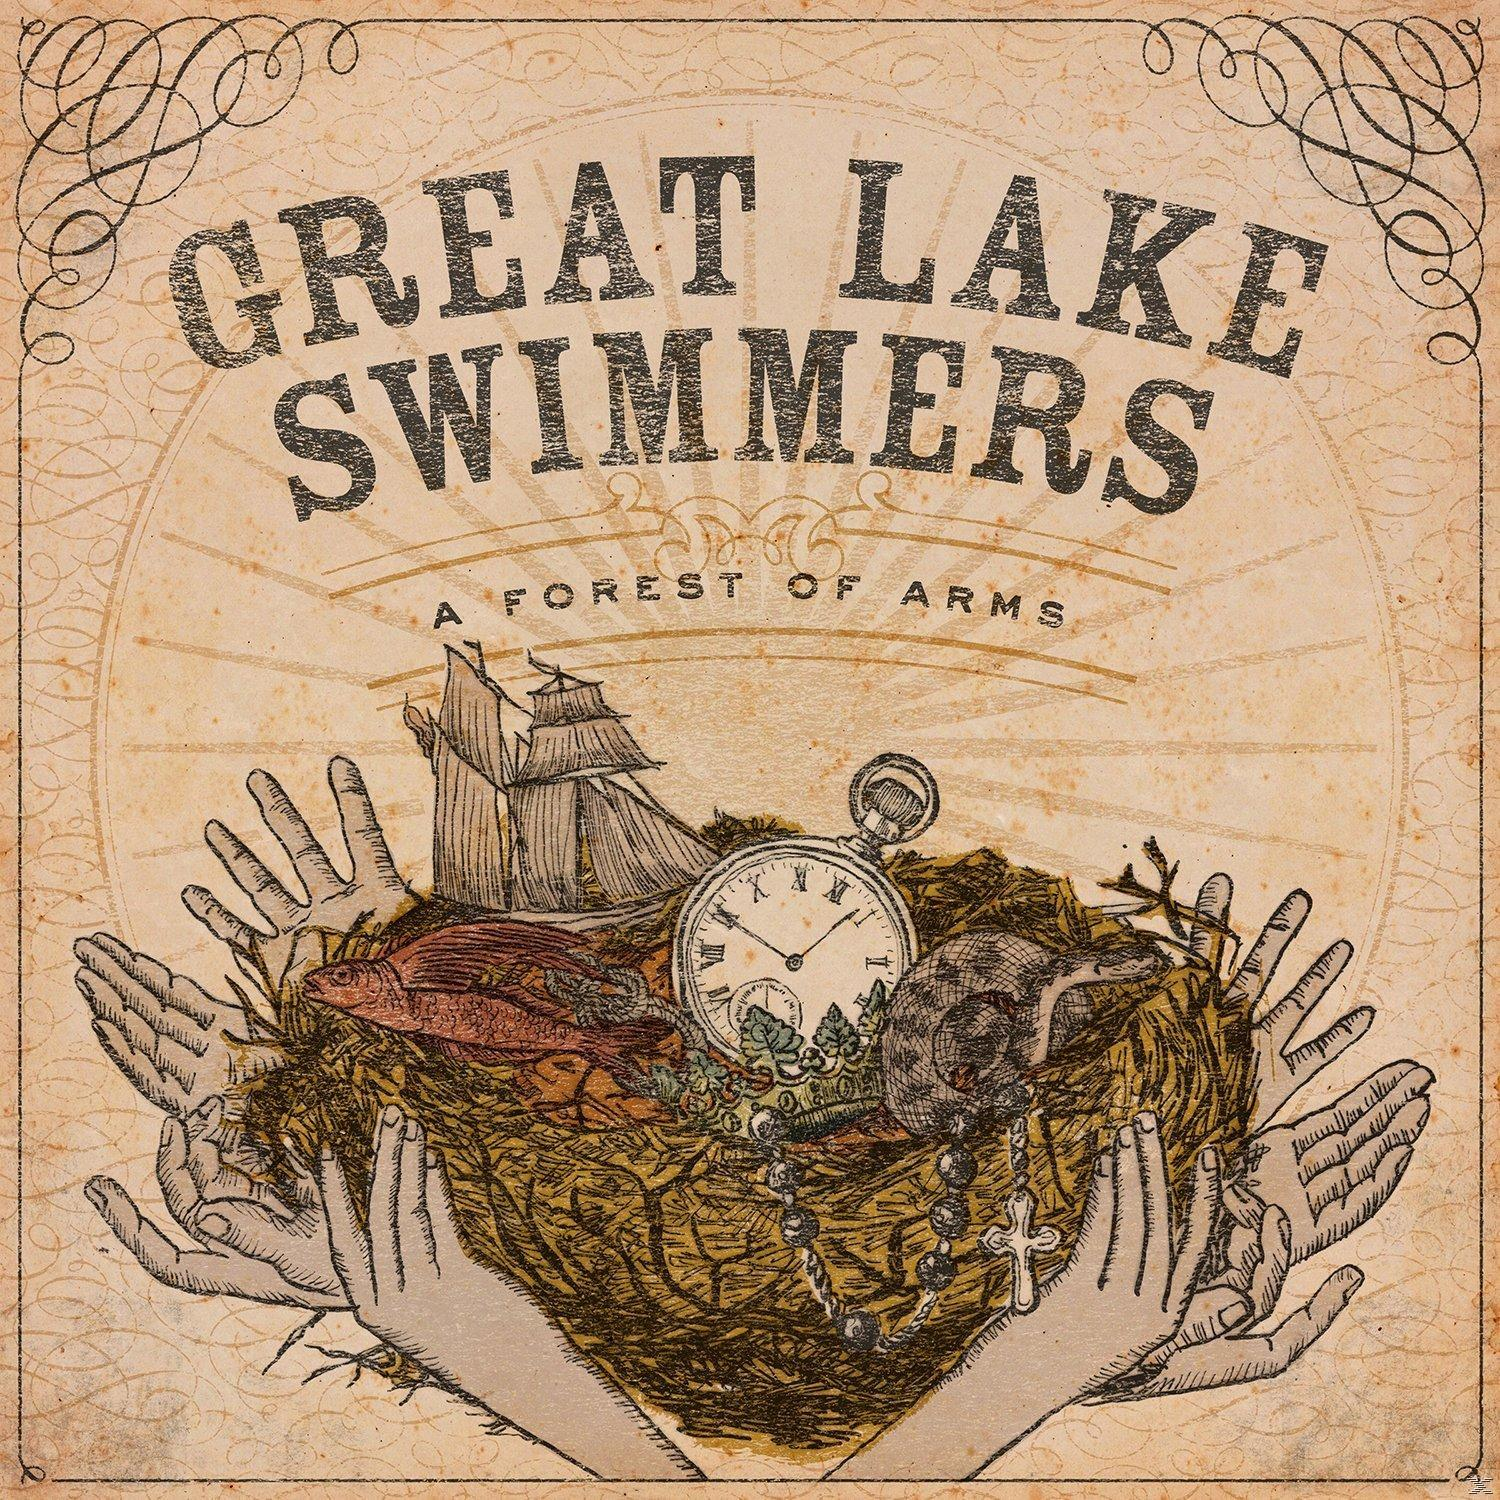 Lake Swimmers Of Arms (Vinyl) A - Great Forest -